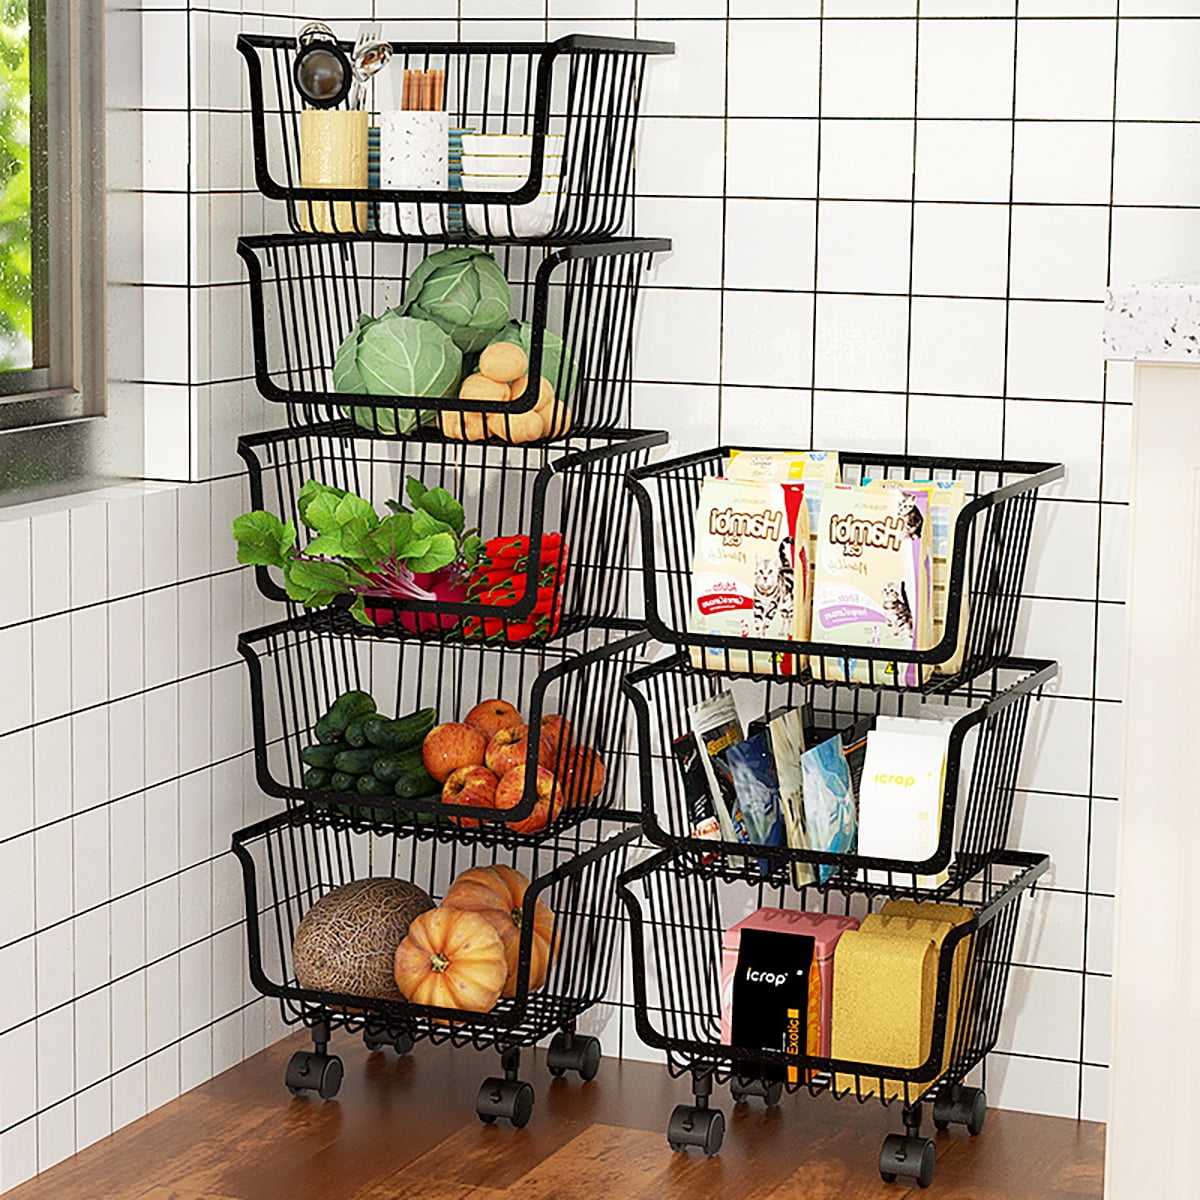 St@llion Vegetable Trolley on Wheels with 4 Tiered Storage Baskets Chrome Plated Rolling Shelf Cart Kitchen Bathroom 